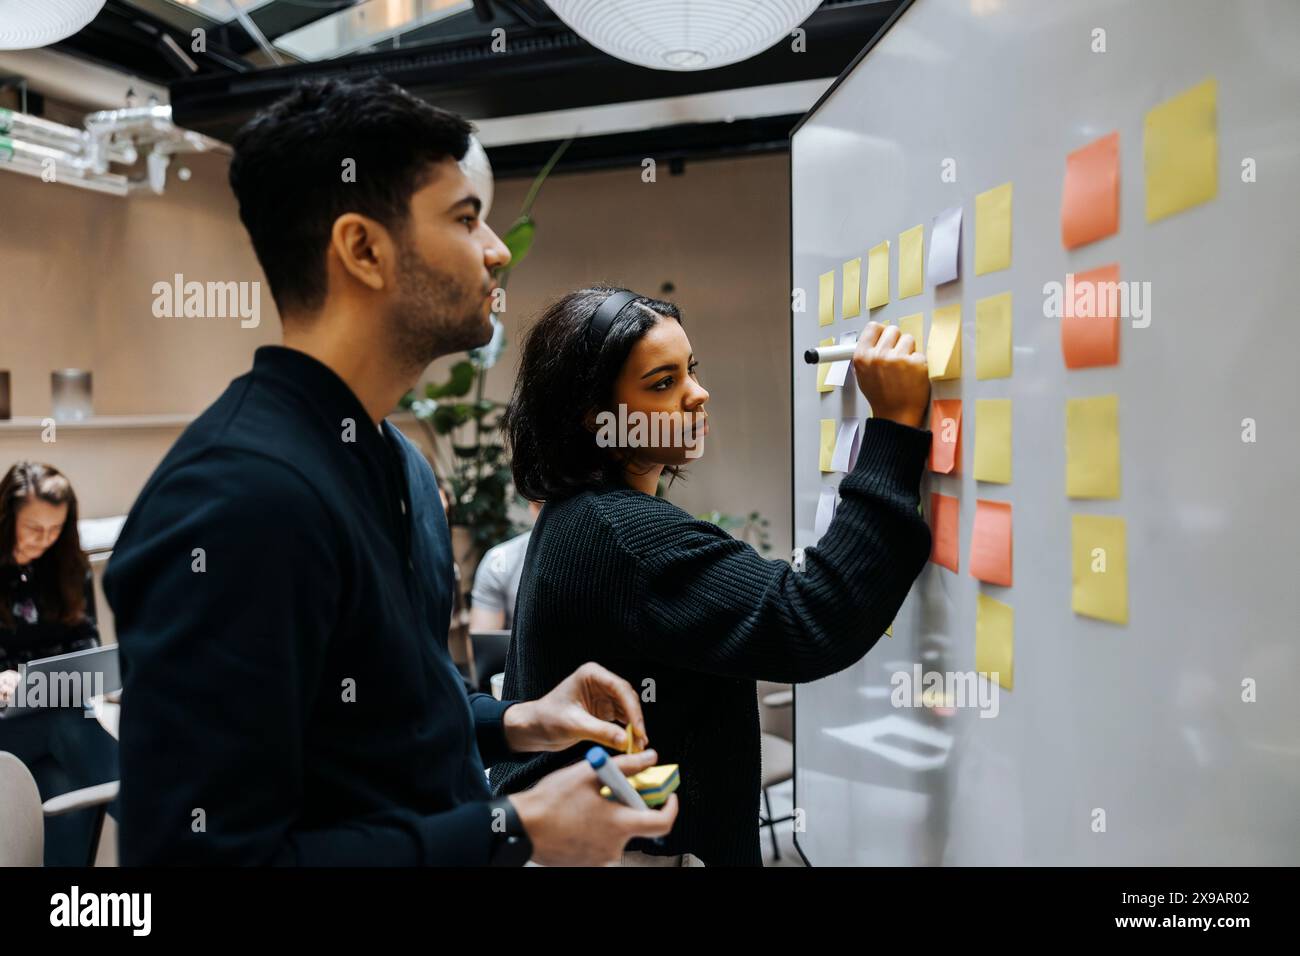 Female entrepreneur writing on adhesive note while standing next to male colleague near whiteboard at office Stock Photo